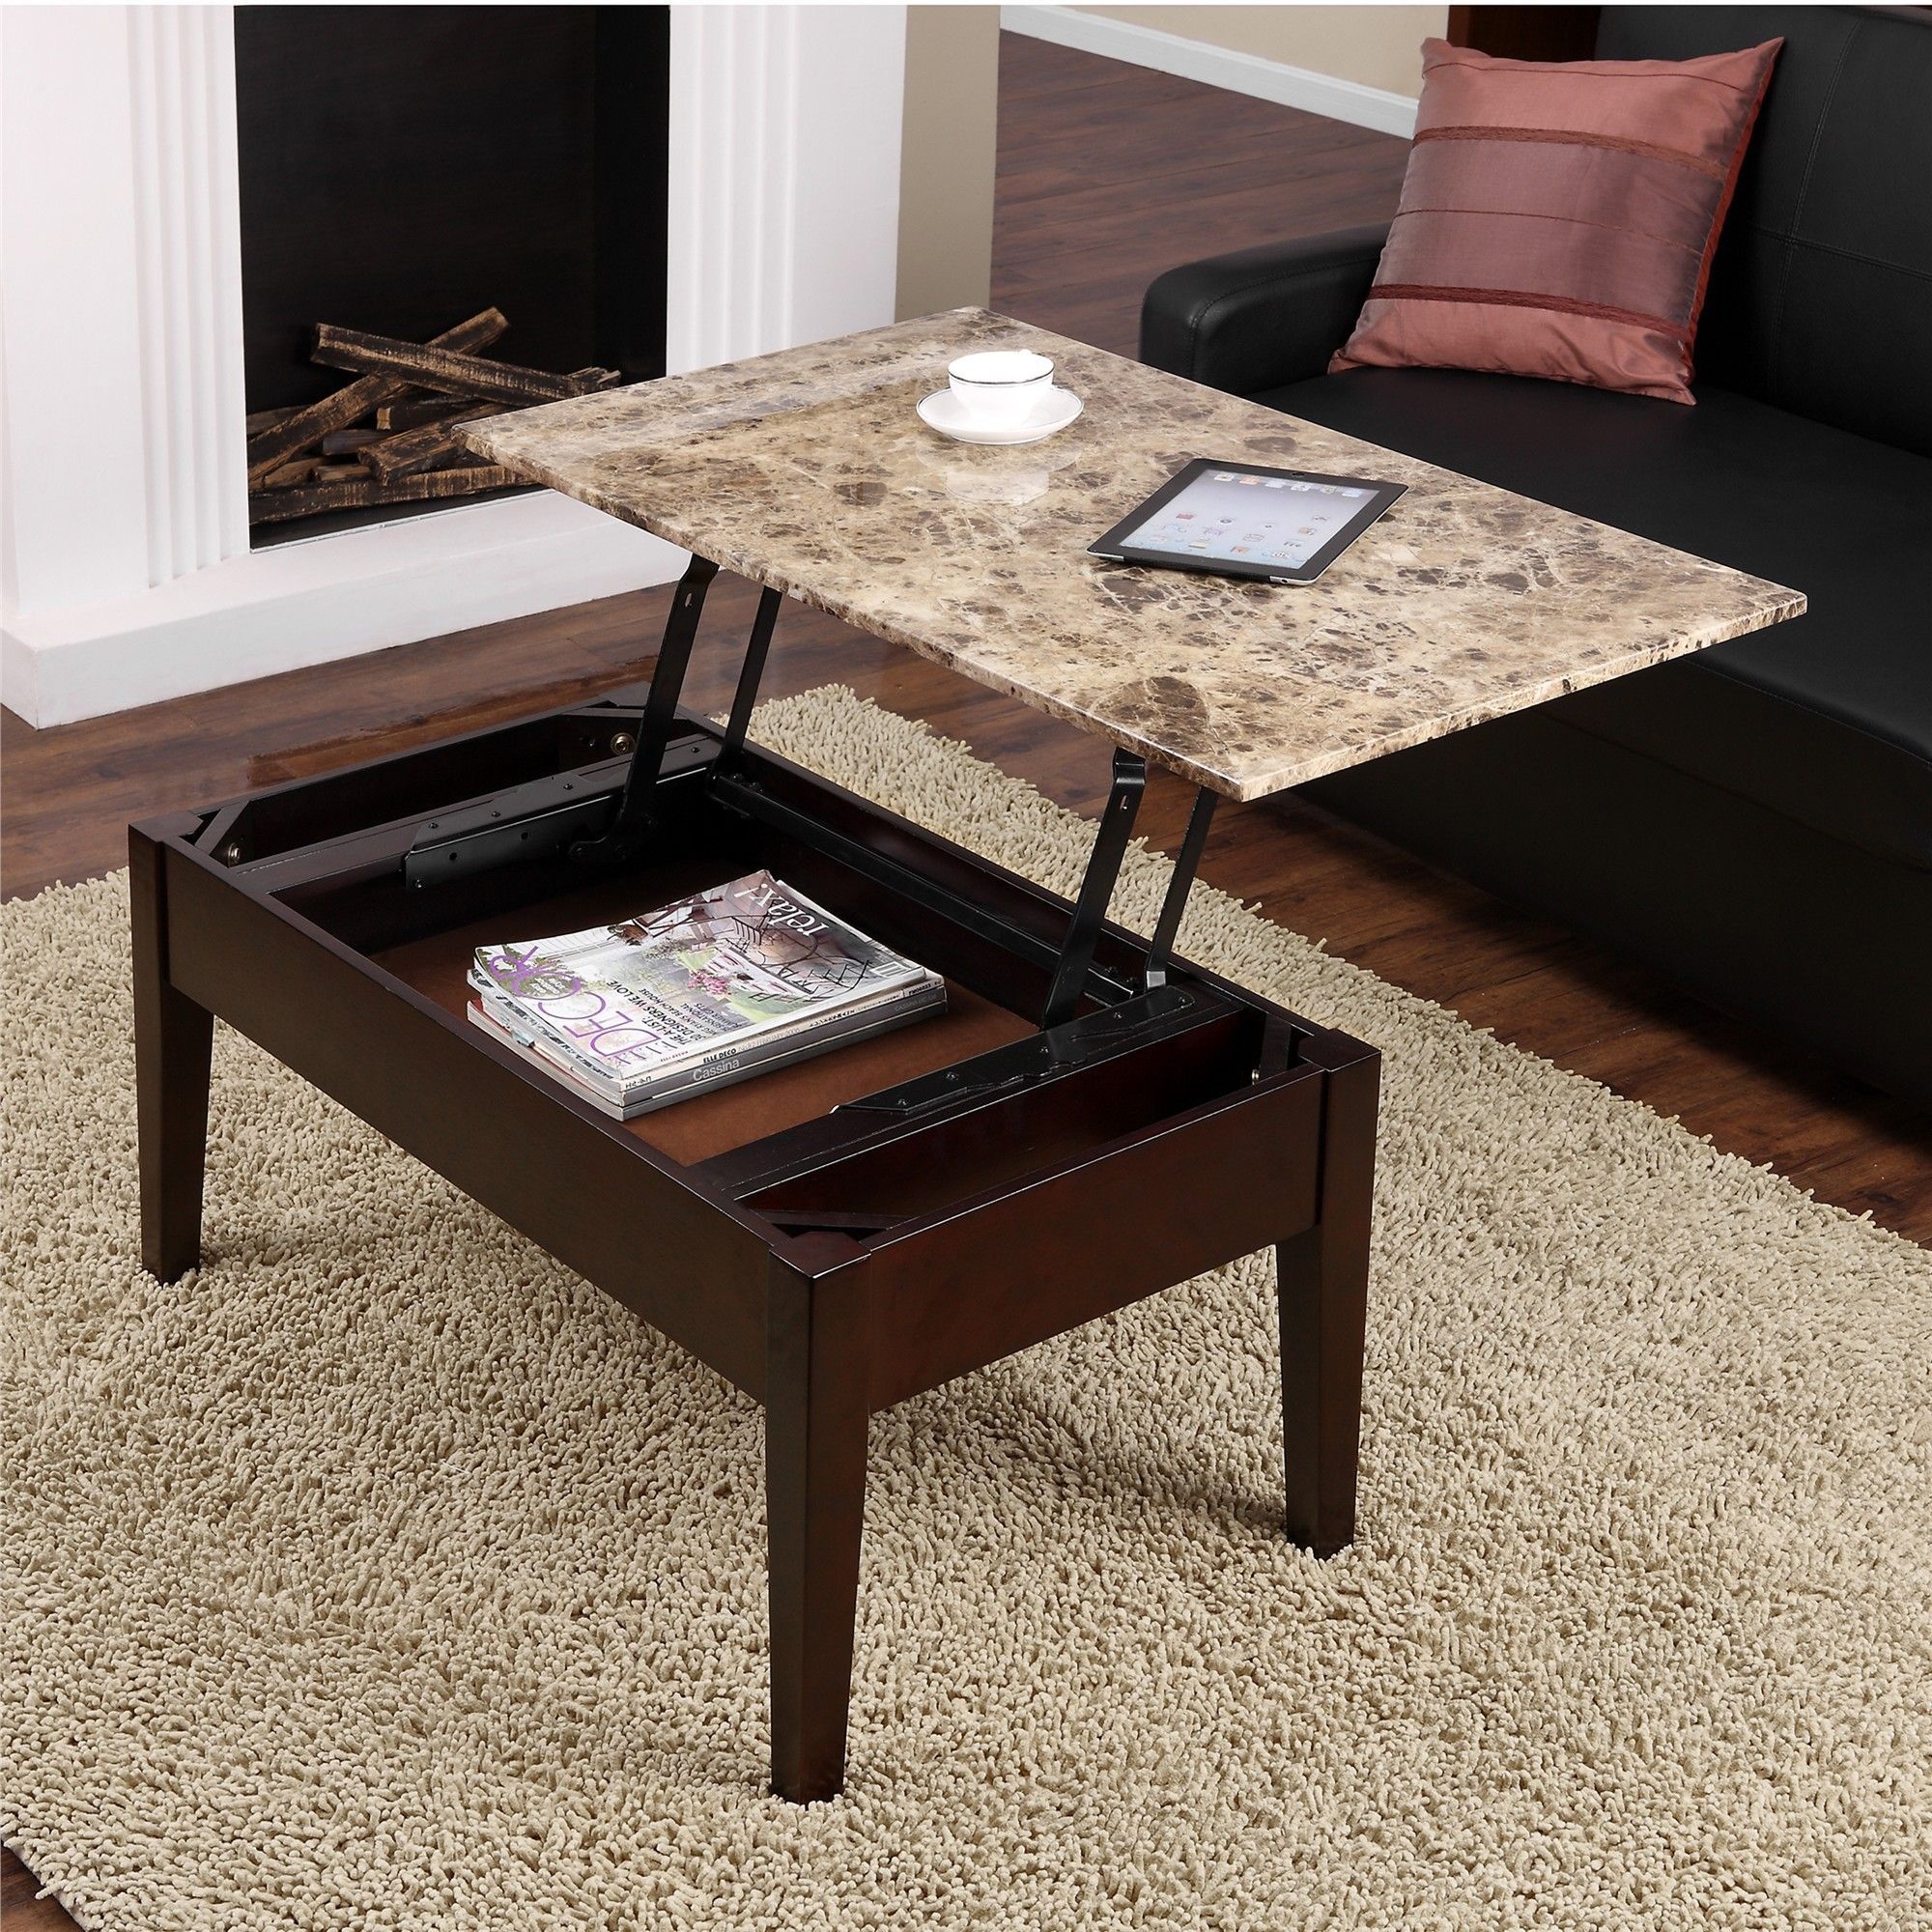 Dorel Living Faux Marble Lift Top Coffee Table – – 11190142 | Coffee In High Gloss Lift Top Coffee Tables (View 16 of 21)